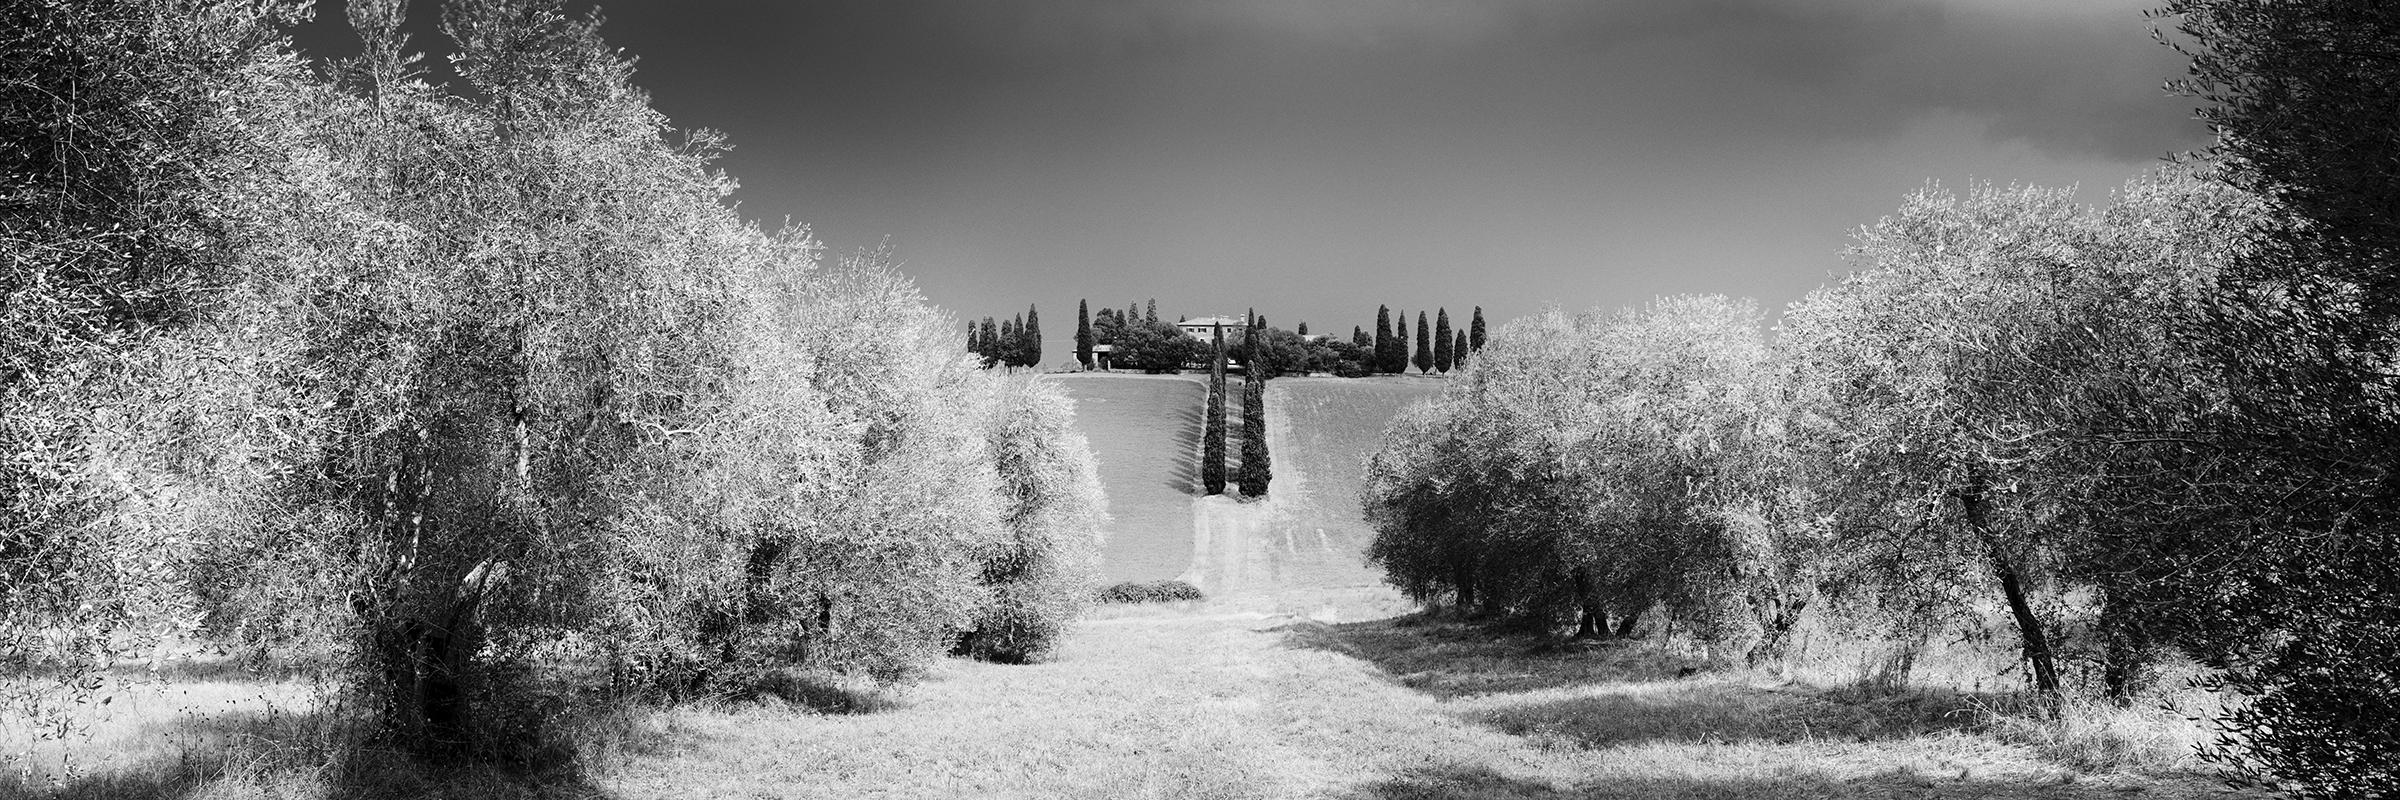 Gerald Berghammer Black and White Photograph - Cypress Trees, Rural House, Tuscany, black and white photography, landscape